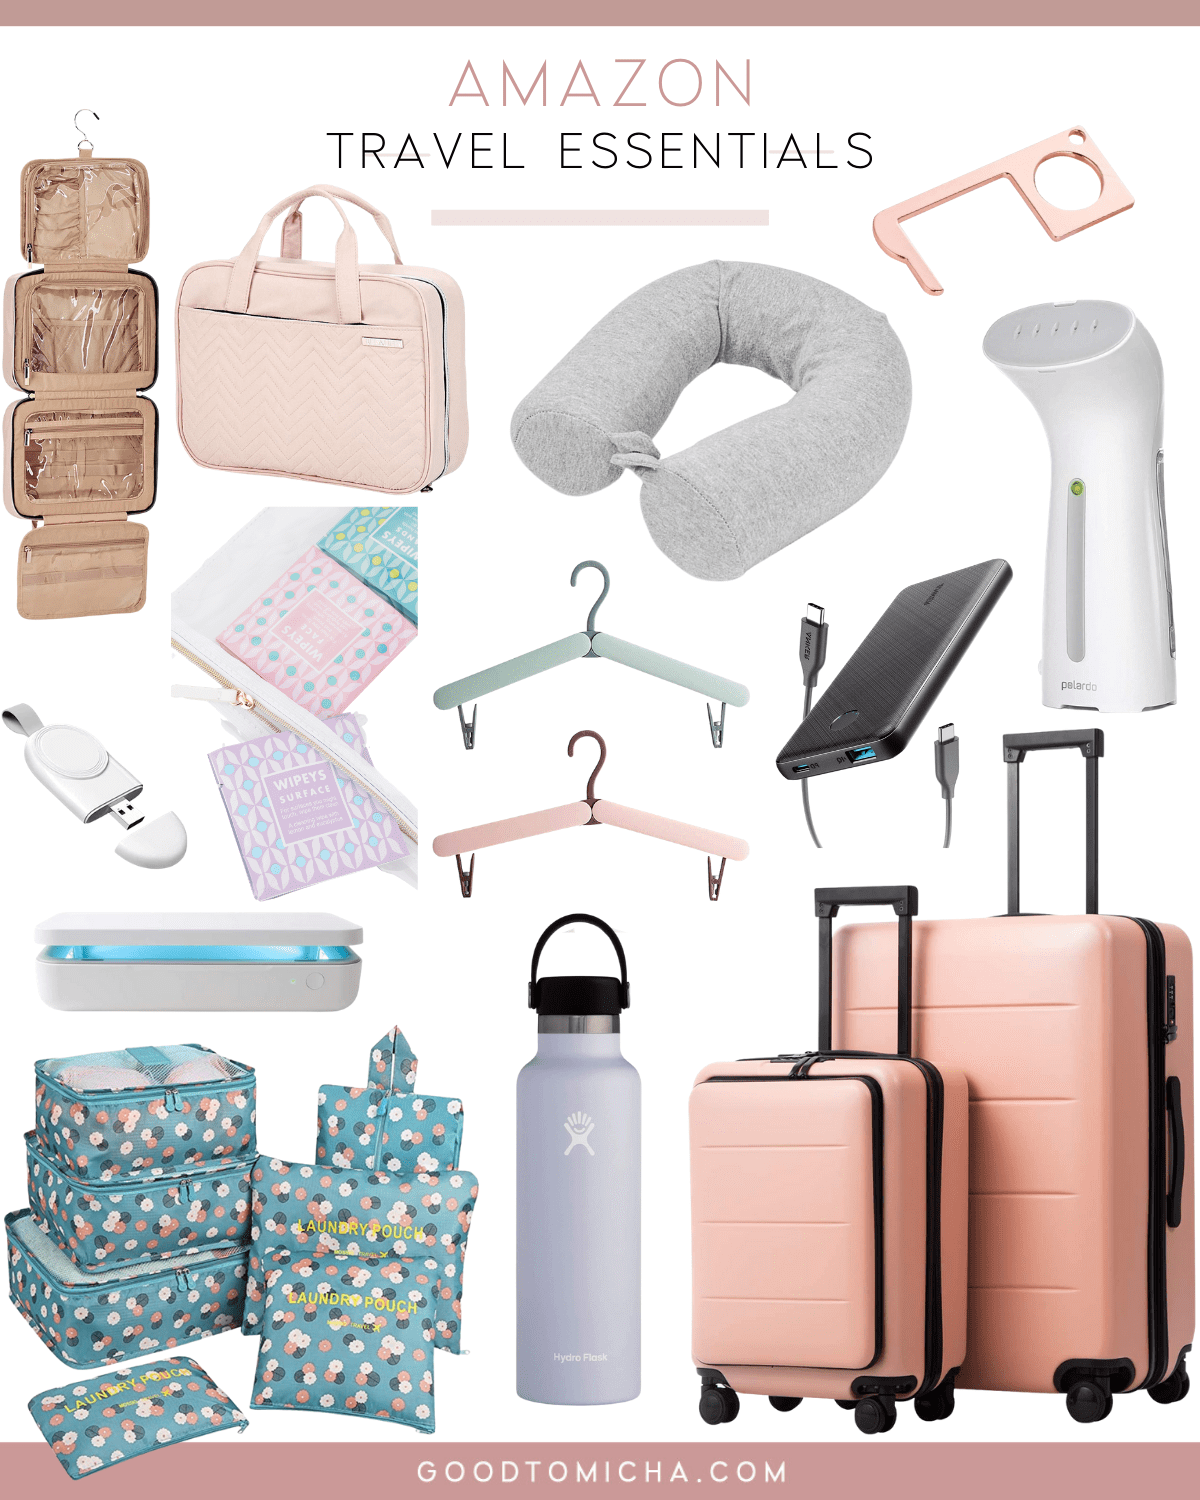 Amazon Travel Essentials | 8 Items to Pack for Your Next Flight